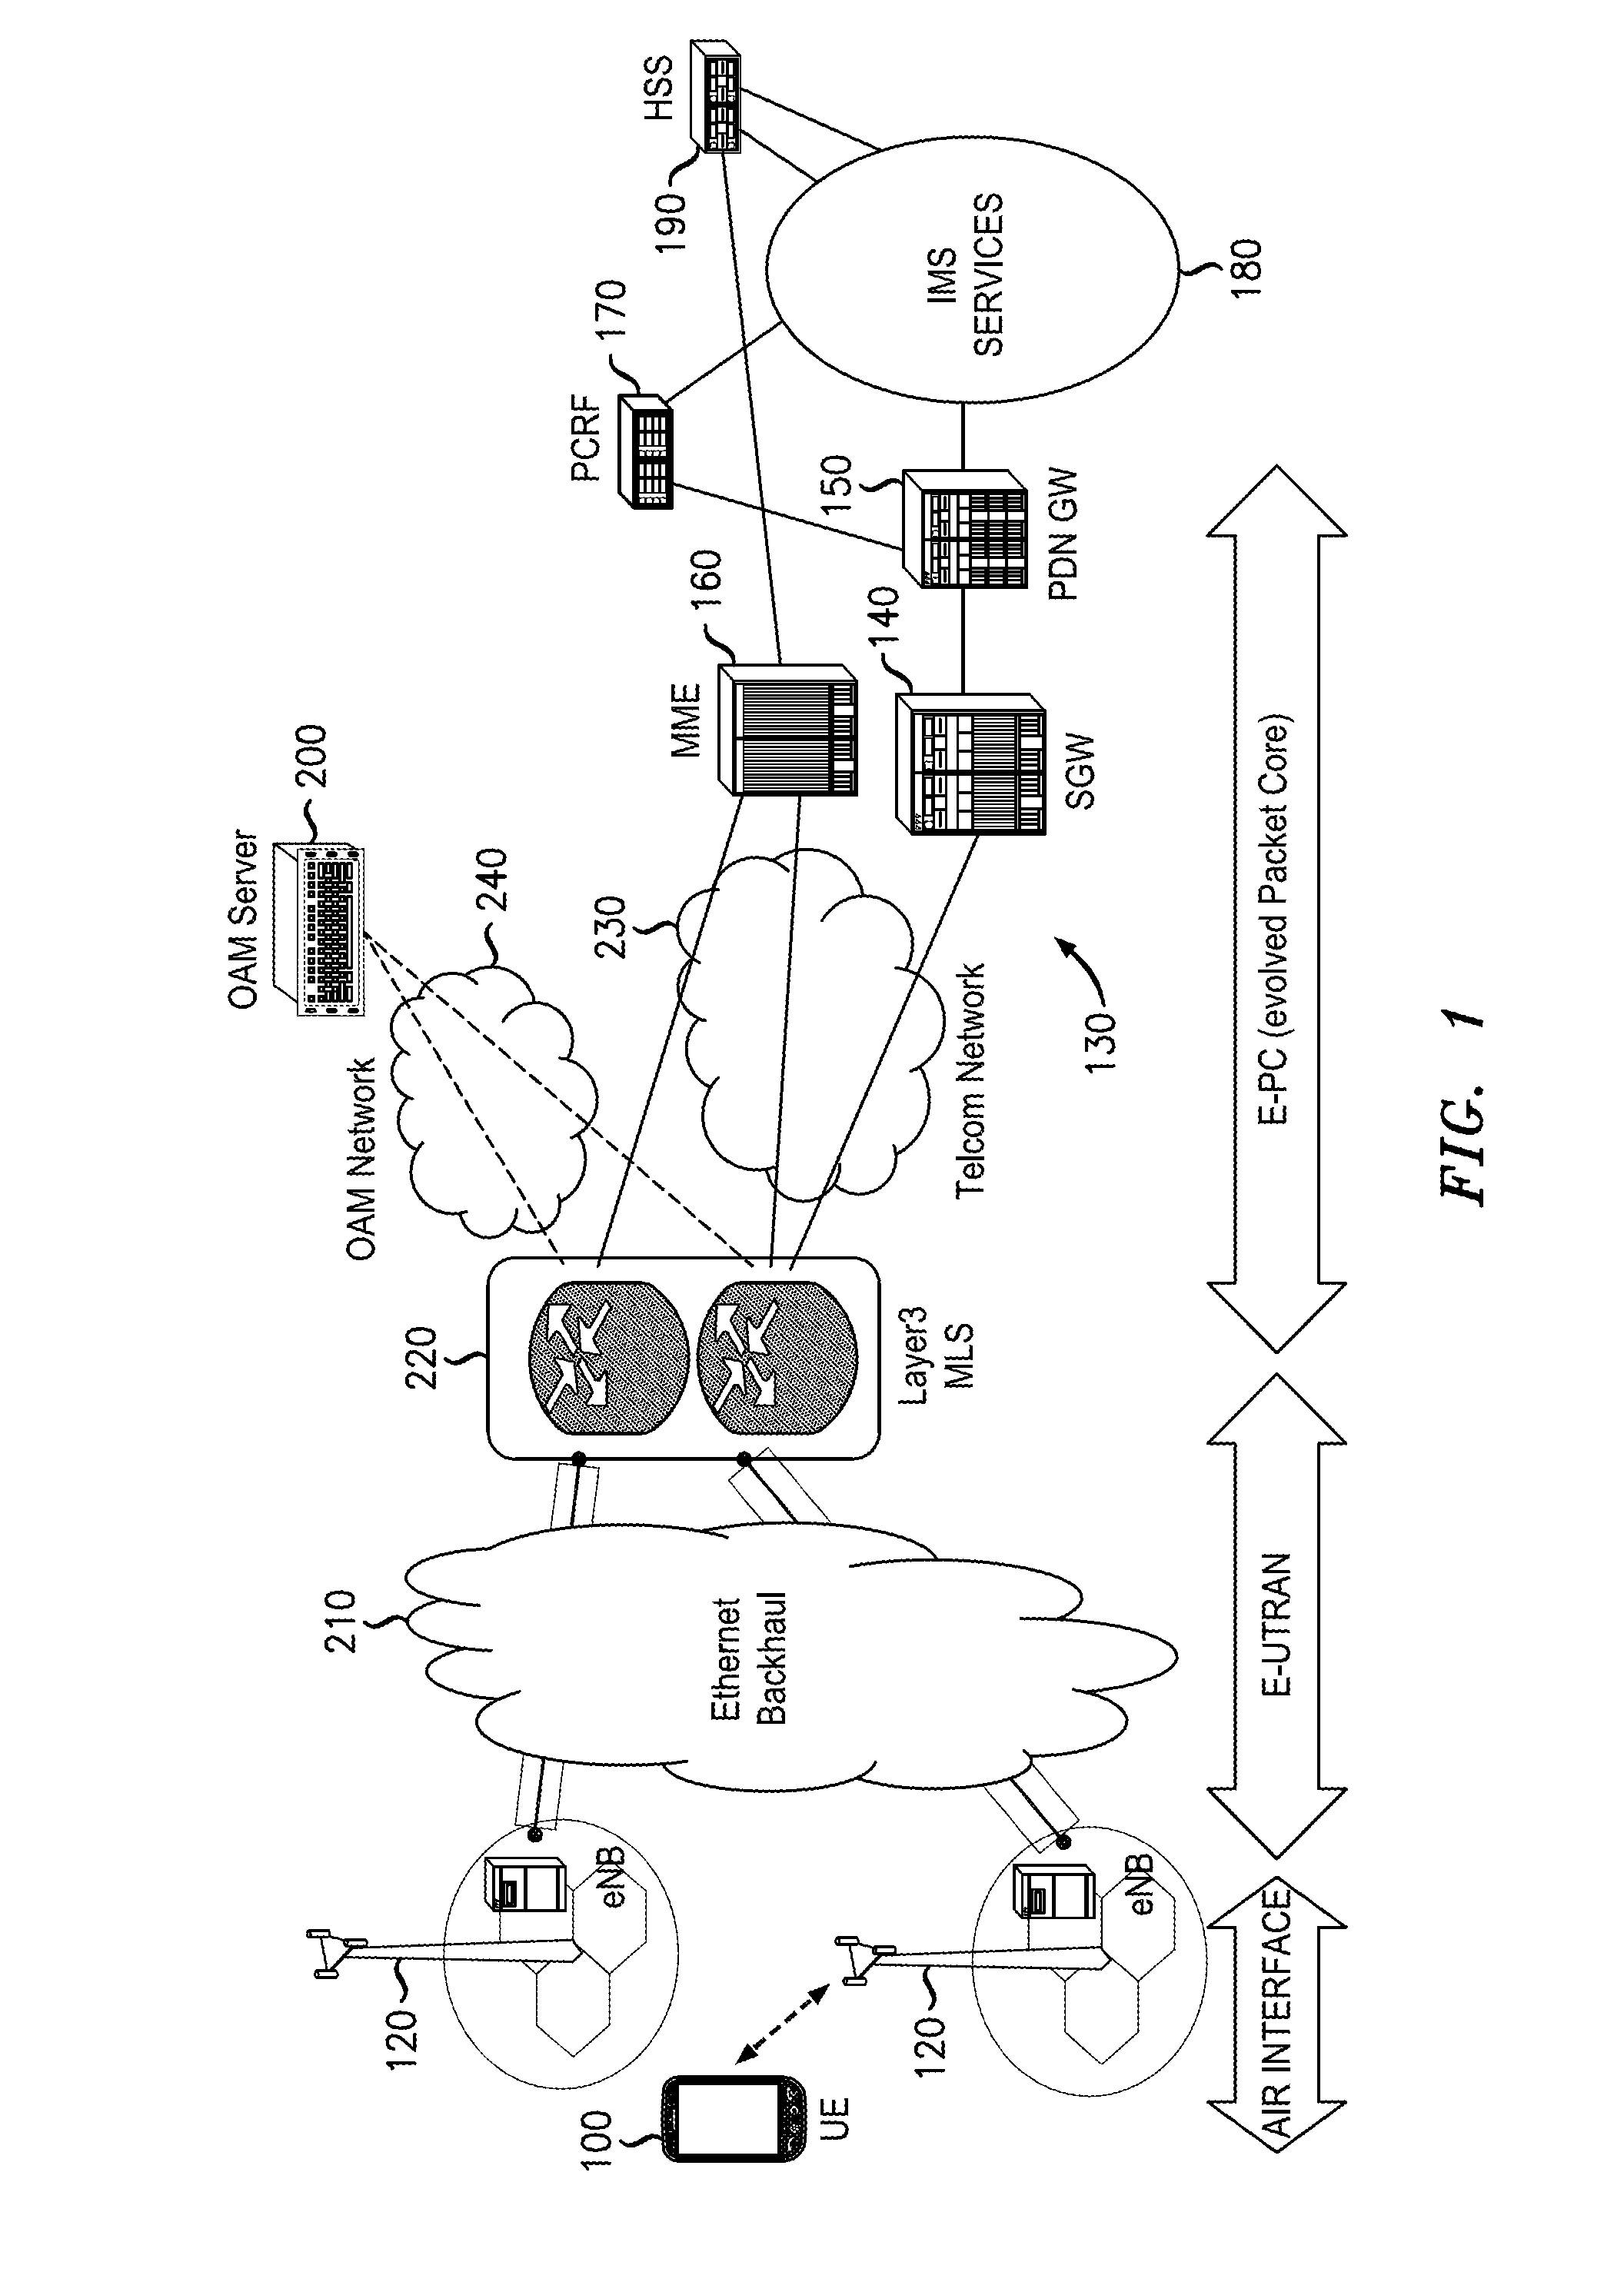 Flexible System And Method To Manage Digital Certificates In A Wireless Network